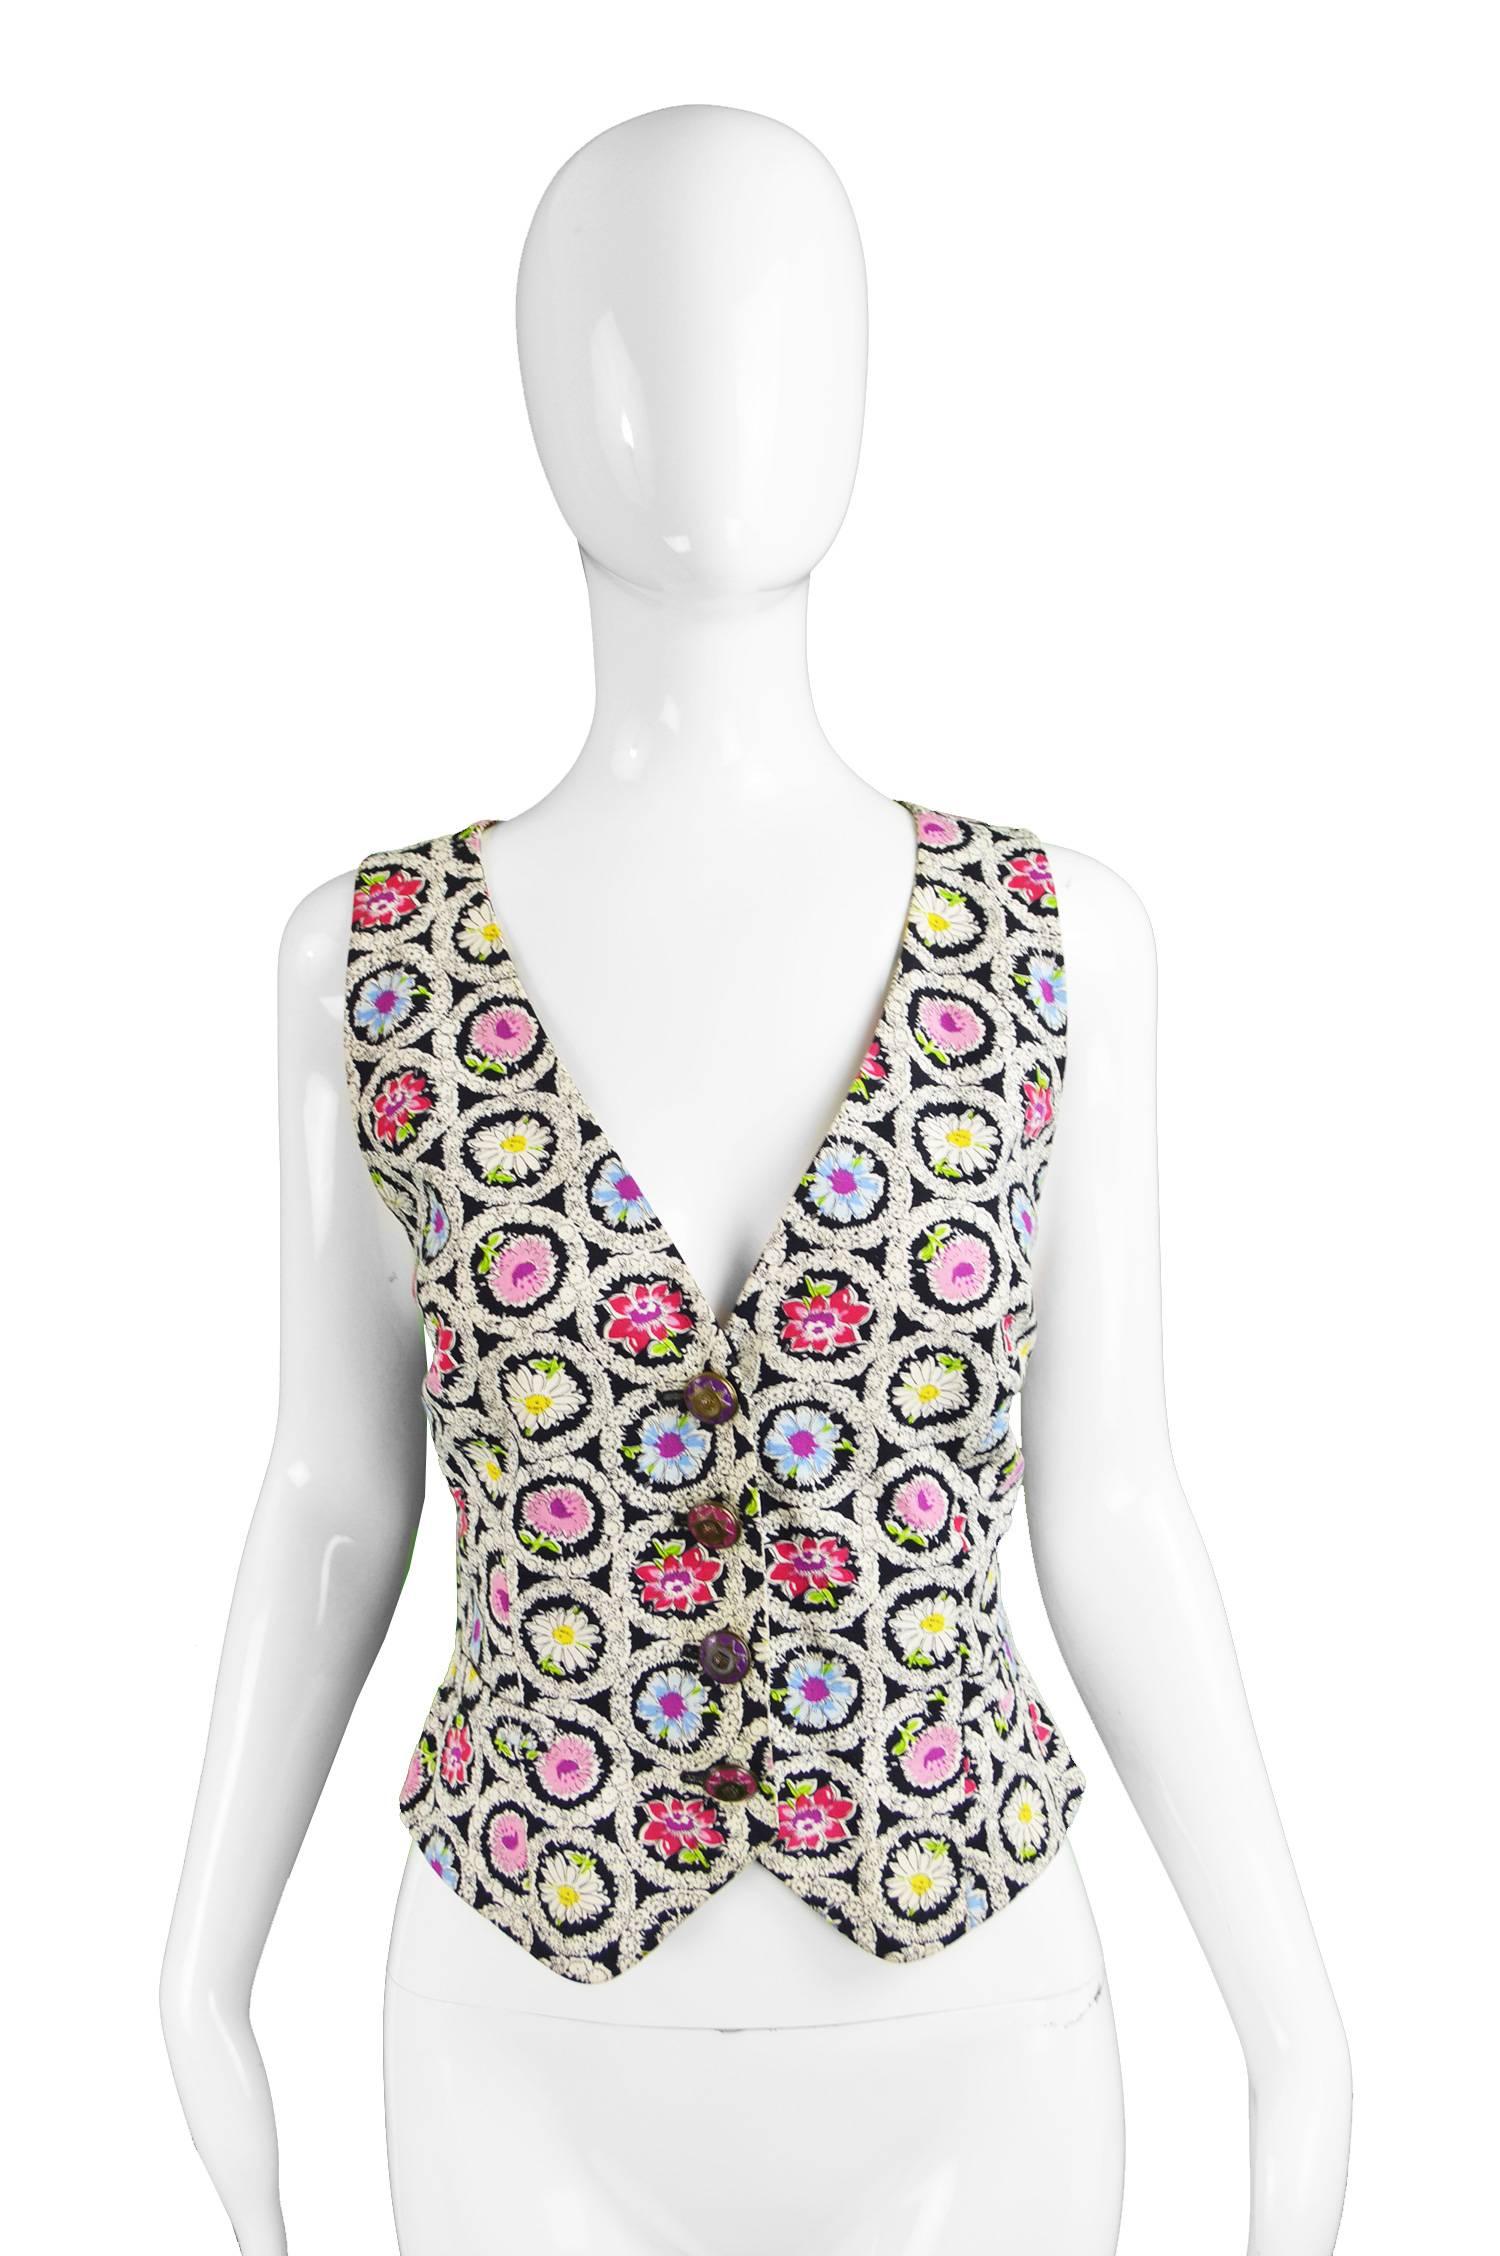 Beige Moschino Cheap & Chic Black & White Floral Cross Back Cotton Vest, 1990s 